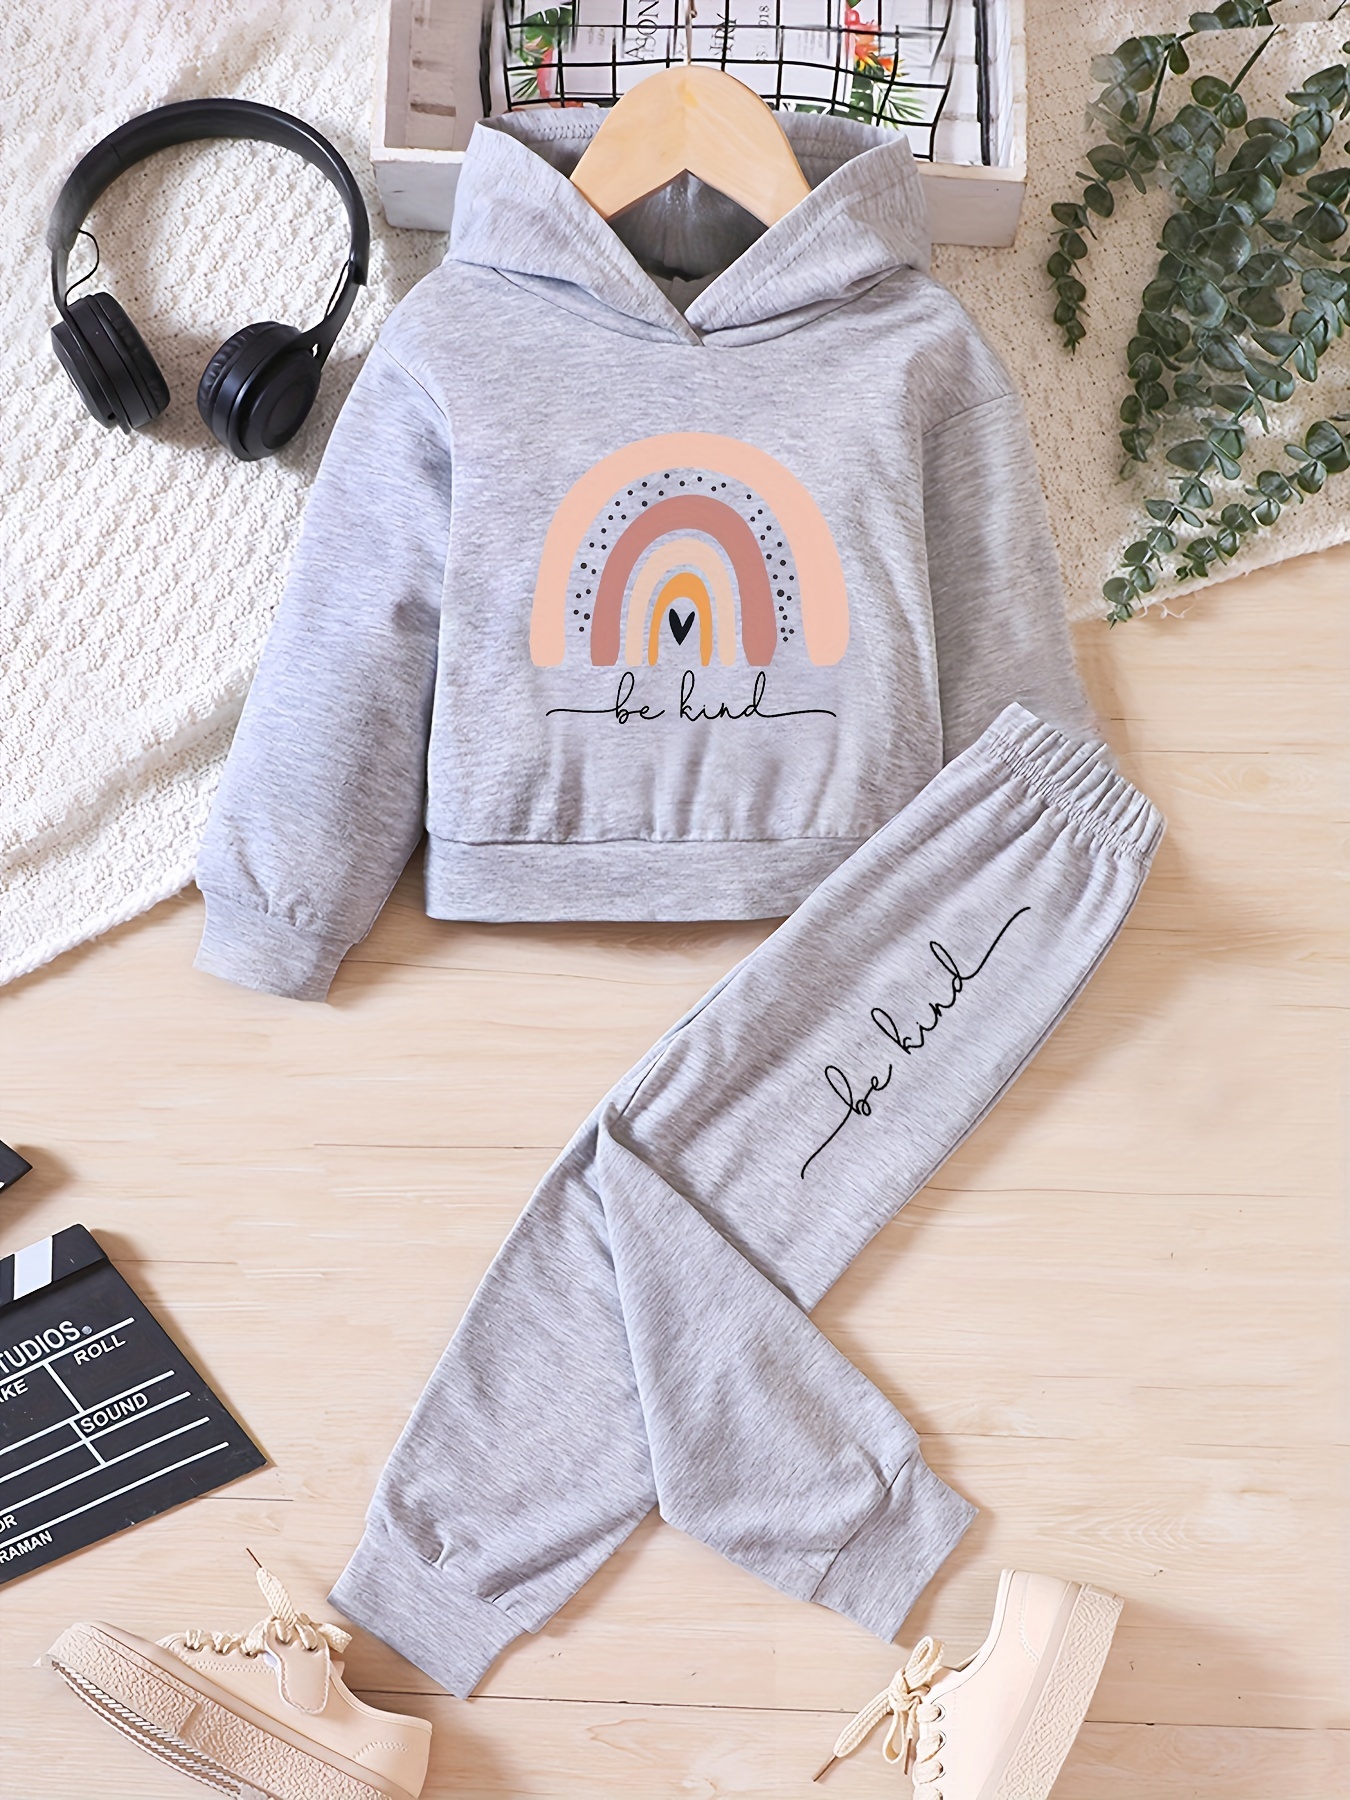 SHEIN Young Girl Rainbow Print White Casual Hoodie And Pants Set For  Outdoor Activities, Sports, And Vacation In Autumn/winter. The Set Includes  A Hooded Sweatshirt With Cuffs And A Pink Digital Unicorn